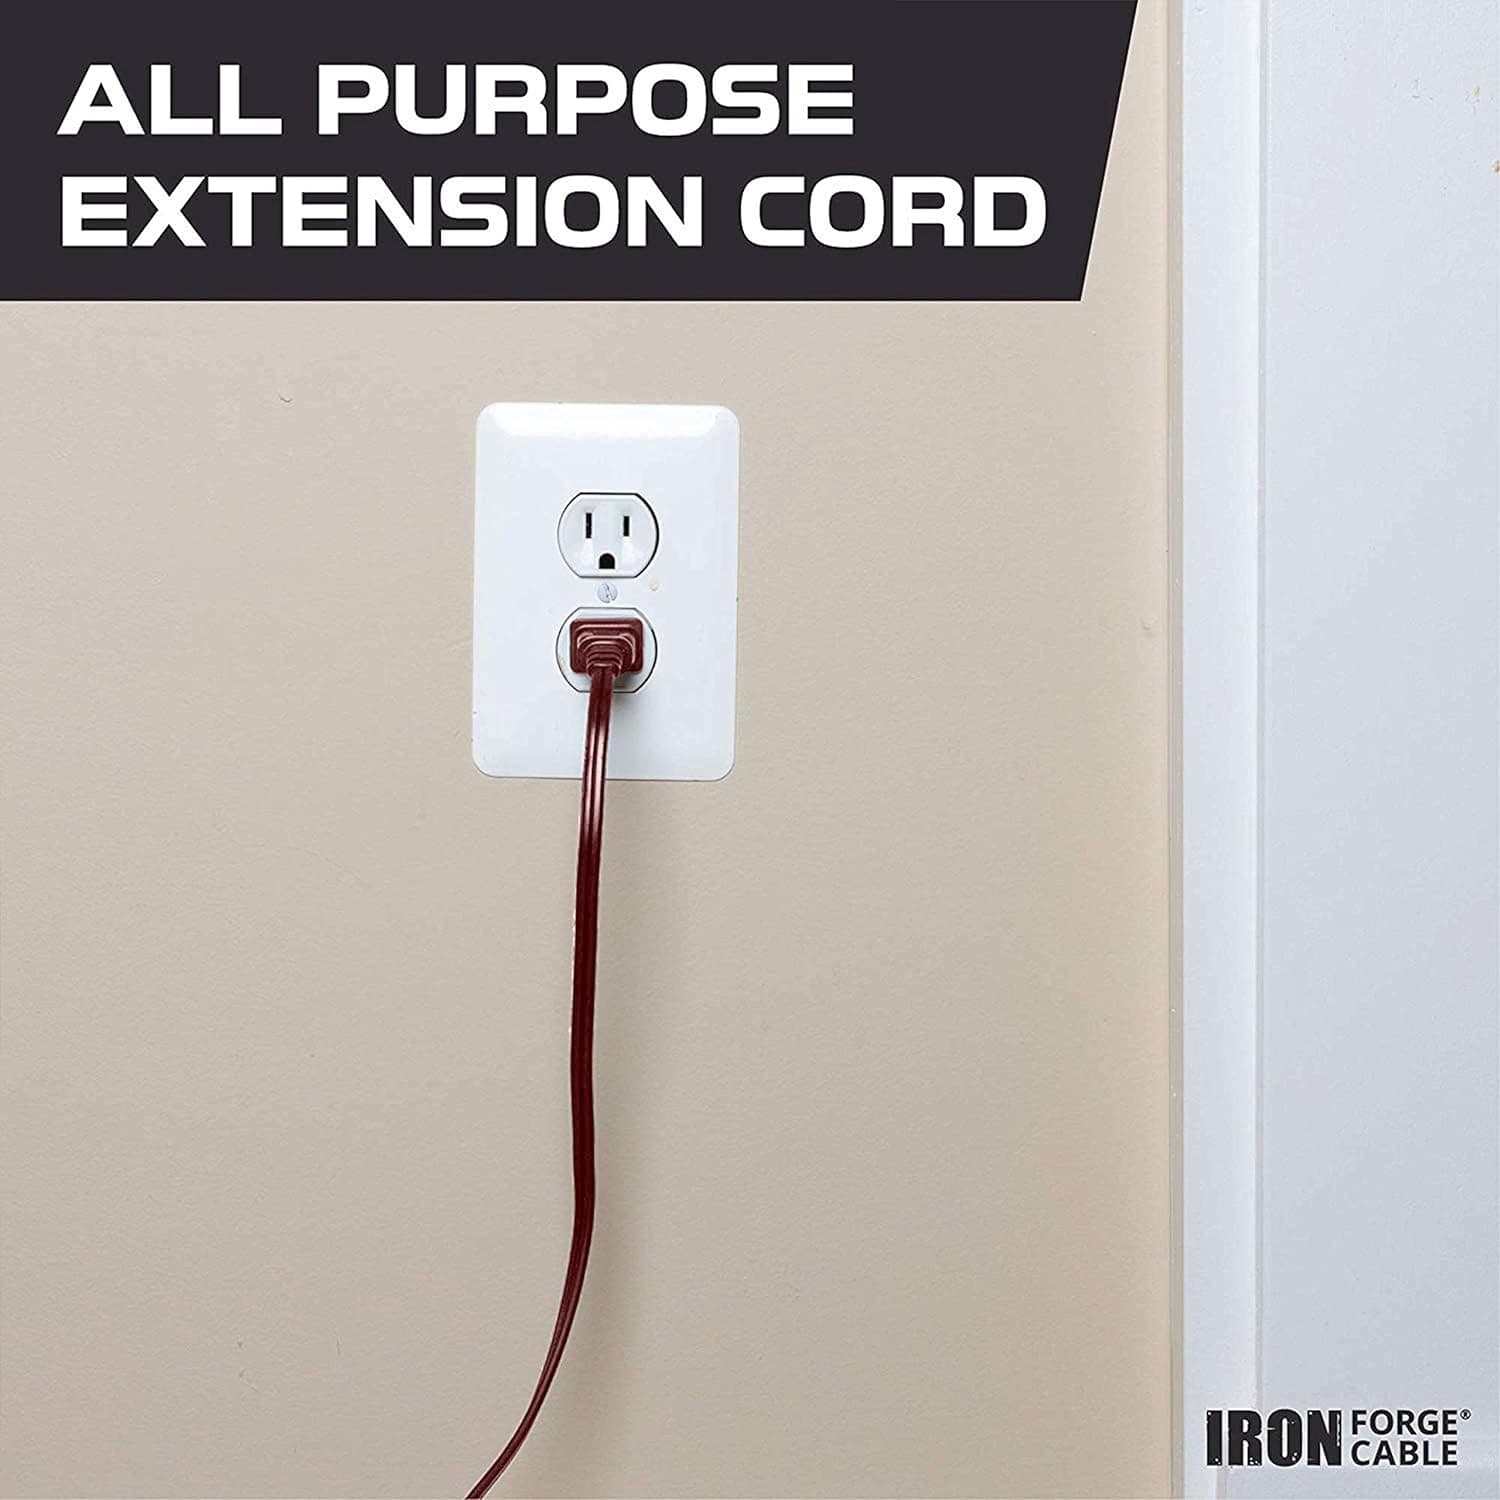 Iron Forge Cable Brown Extension Cord with 3 Outlets 3 Pack, 10ft 15ft & 20ft, 16 2 Indoor Extension Cord with Multiple Outlets 13 AMP 2 Prong Electrical Cable for Home Office Household Appliances 5